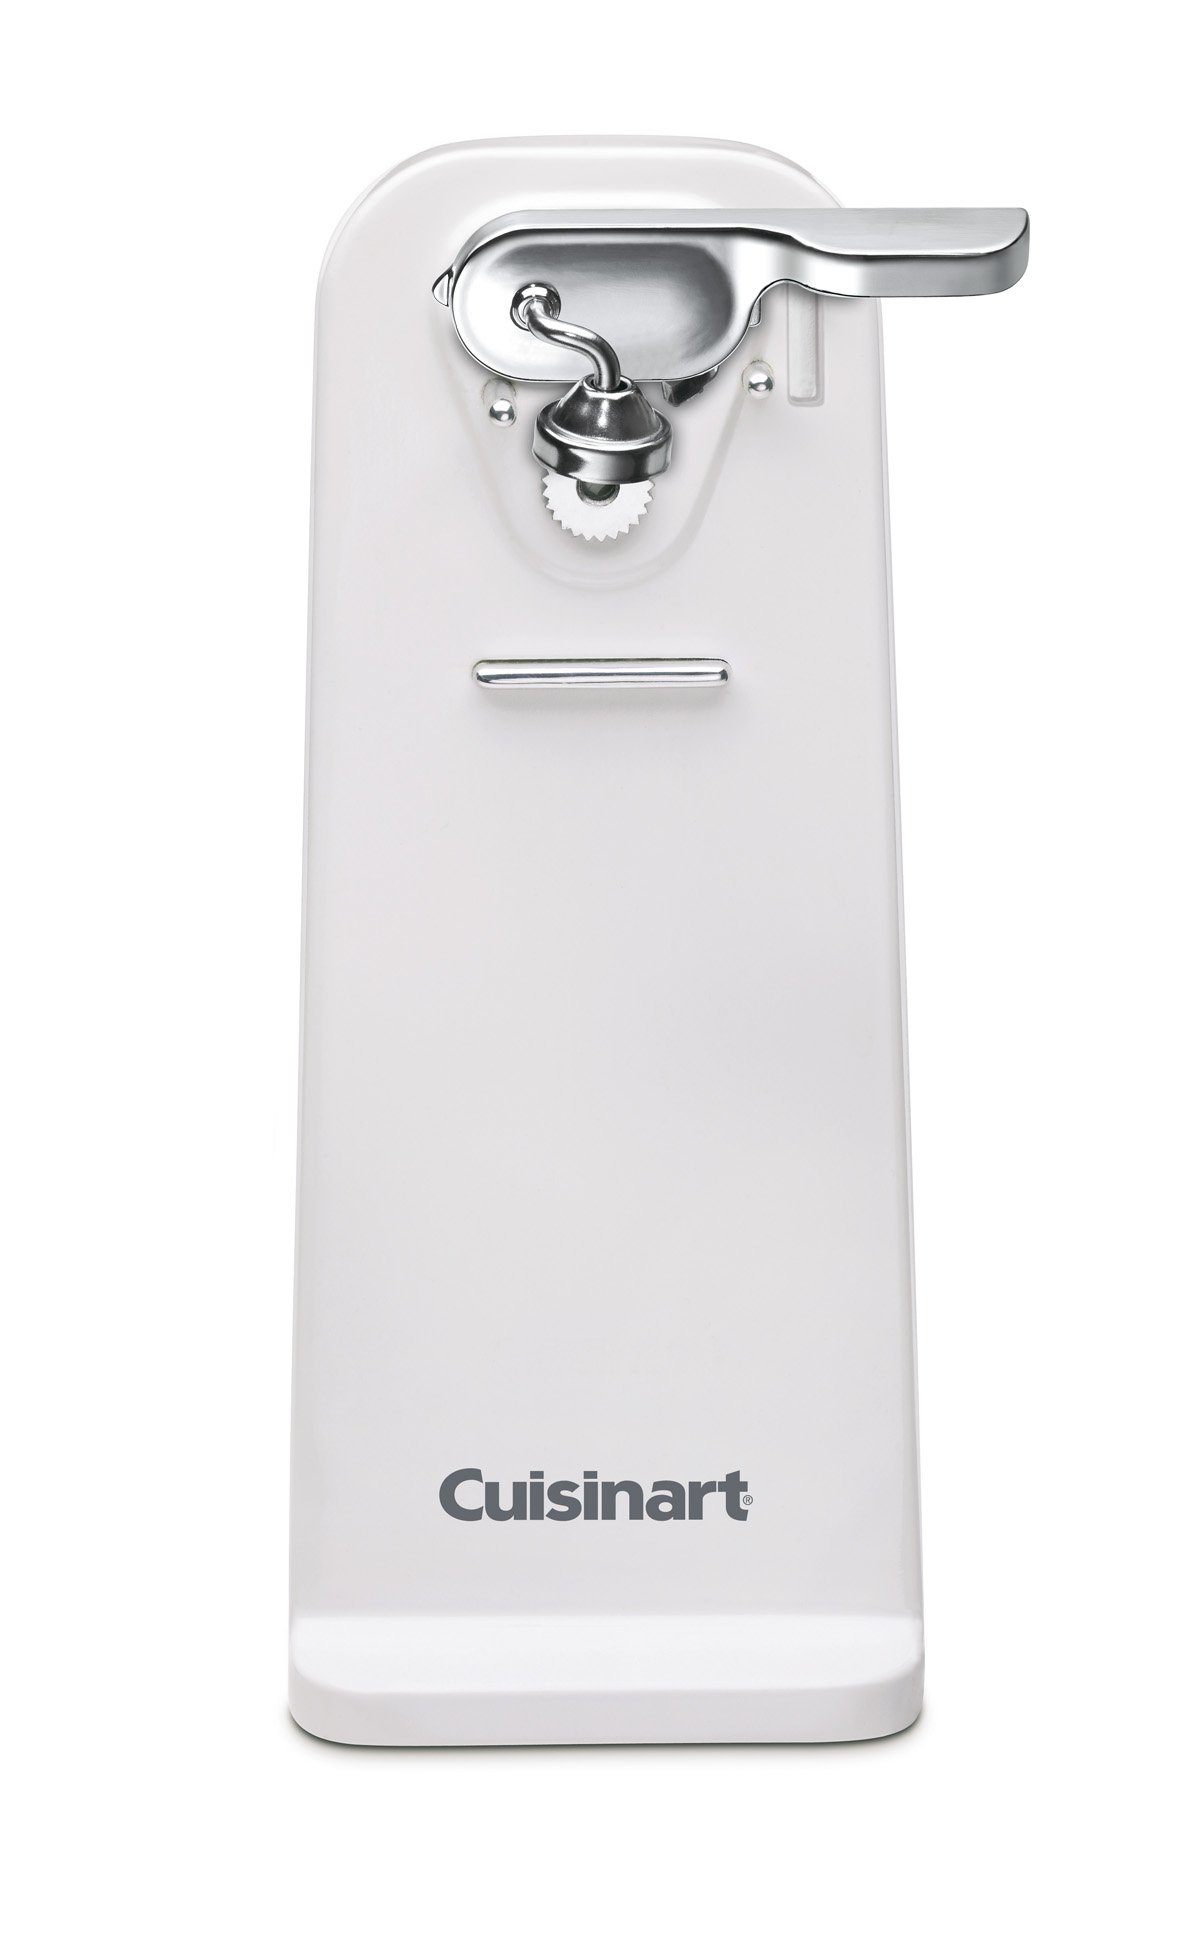 Cuisinart 4-Slice Toaster (CPT-142P1) and Electric Can Opener (CCO-50N) Bundle, White